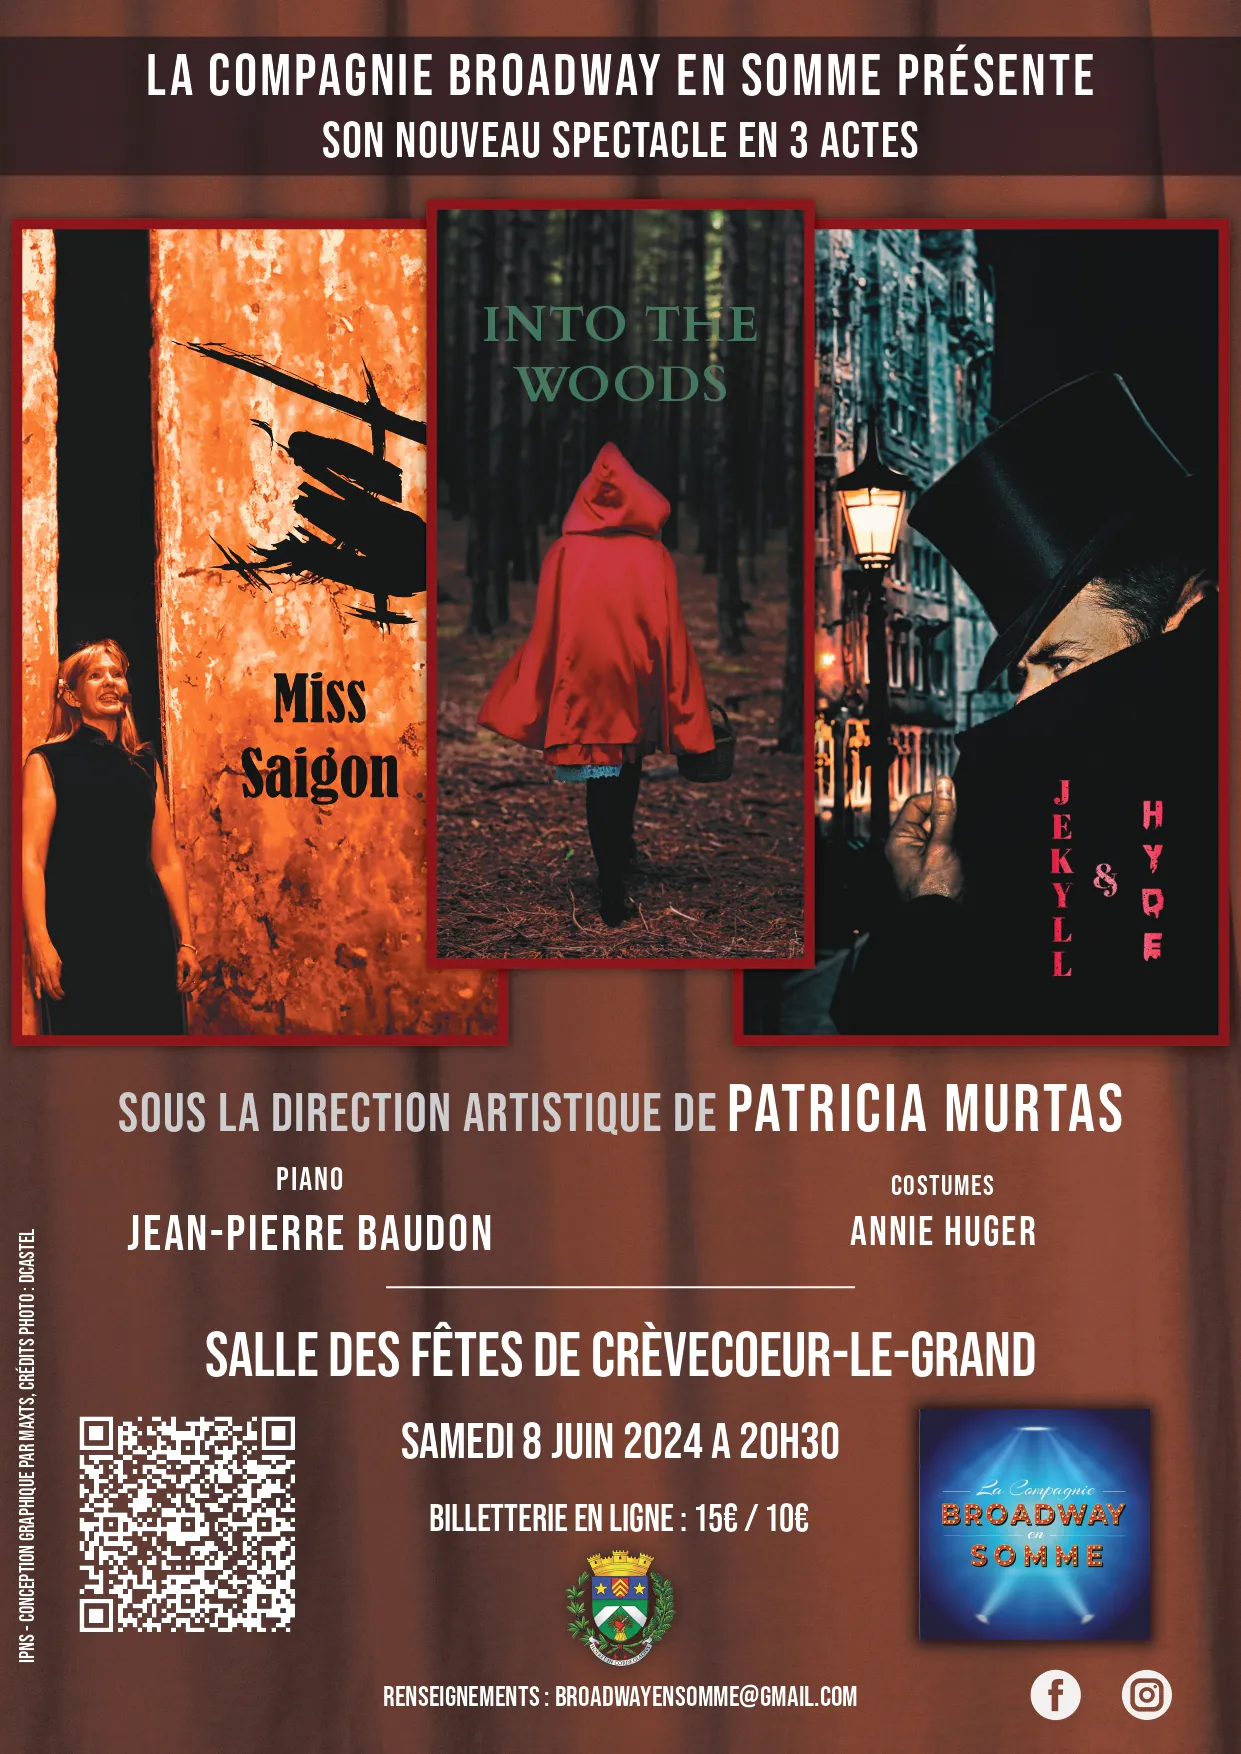 Spectacle en 3 actes: Miss Saïgon Into the woods Jekyll and Hyde